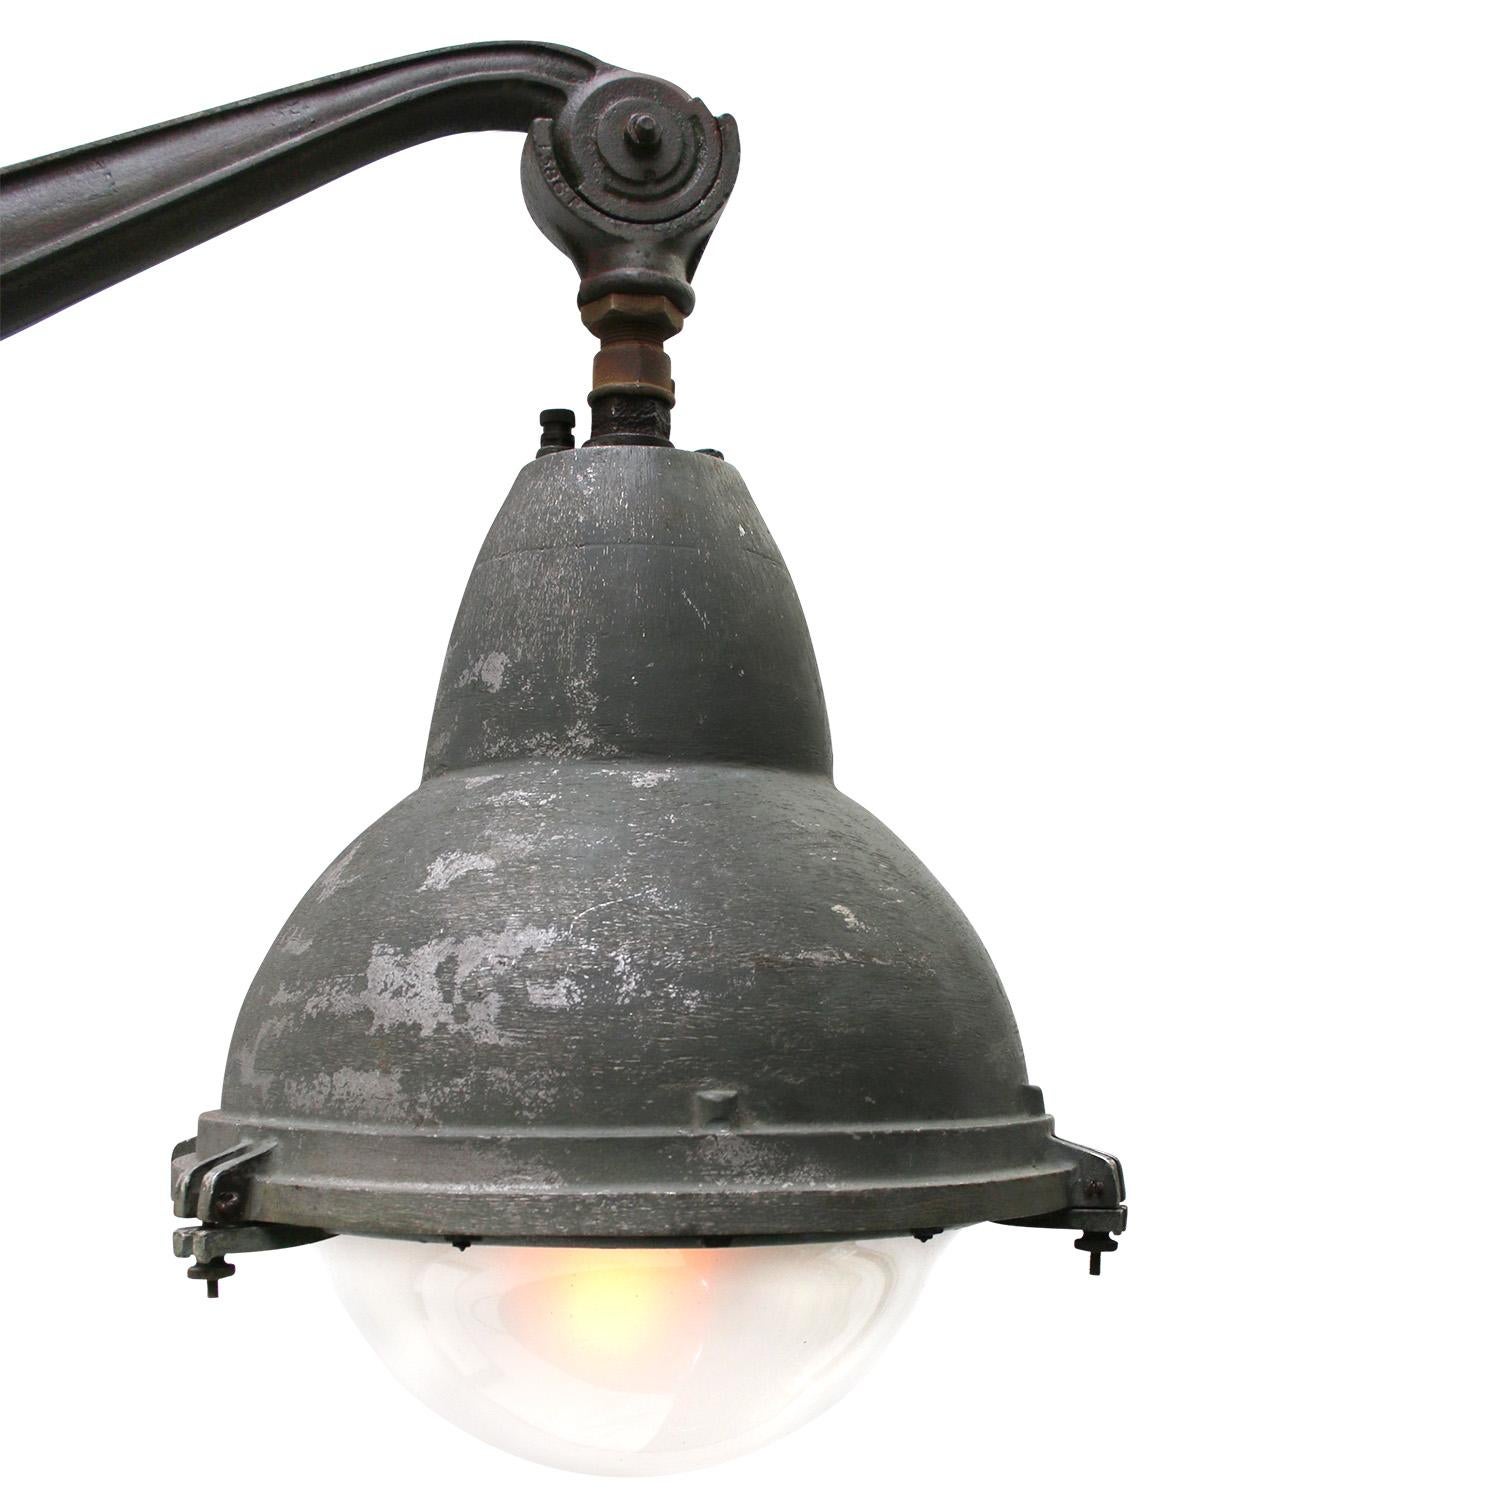 Vintage French cast iron streetlight by Eclatec, France
Cast alumninium, cast iron base and frosted glass

Size wall mount 25 × 8 cm

Shipped in parts, easy to assemble

Weight: 20.00 kg / 44.1 lb

Priced per individual item. All lamps have